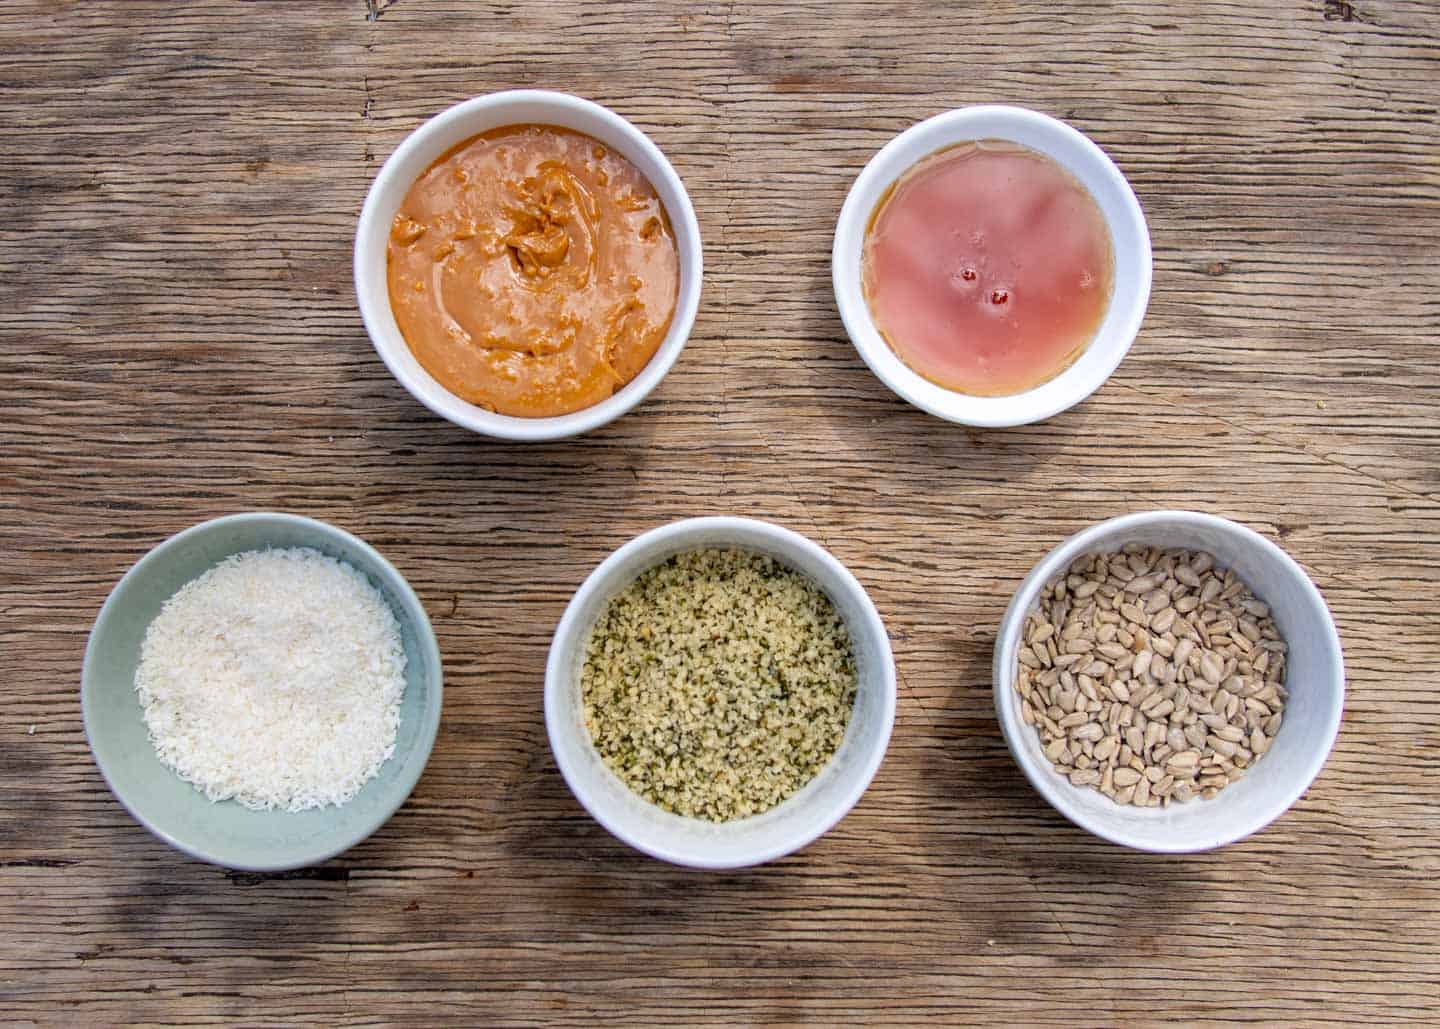 Ingredients for high protein hemp balls in small bowls